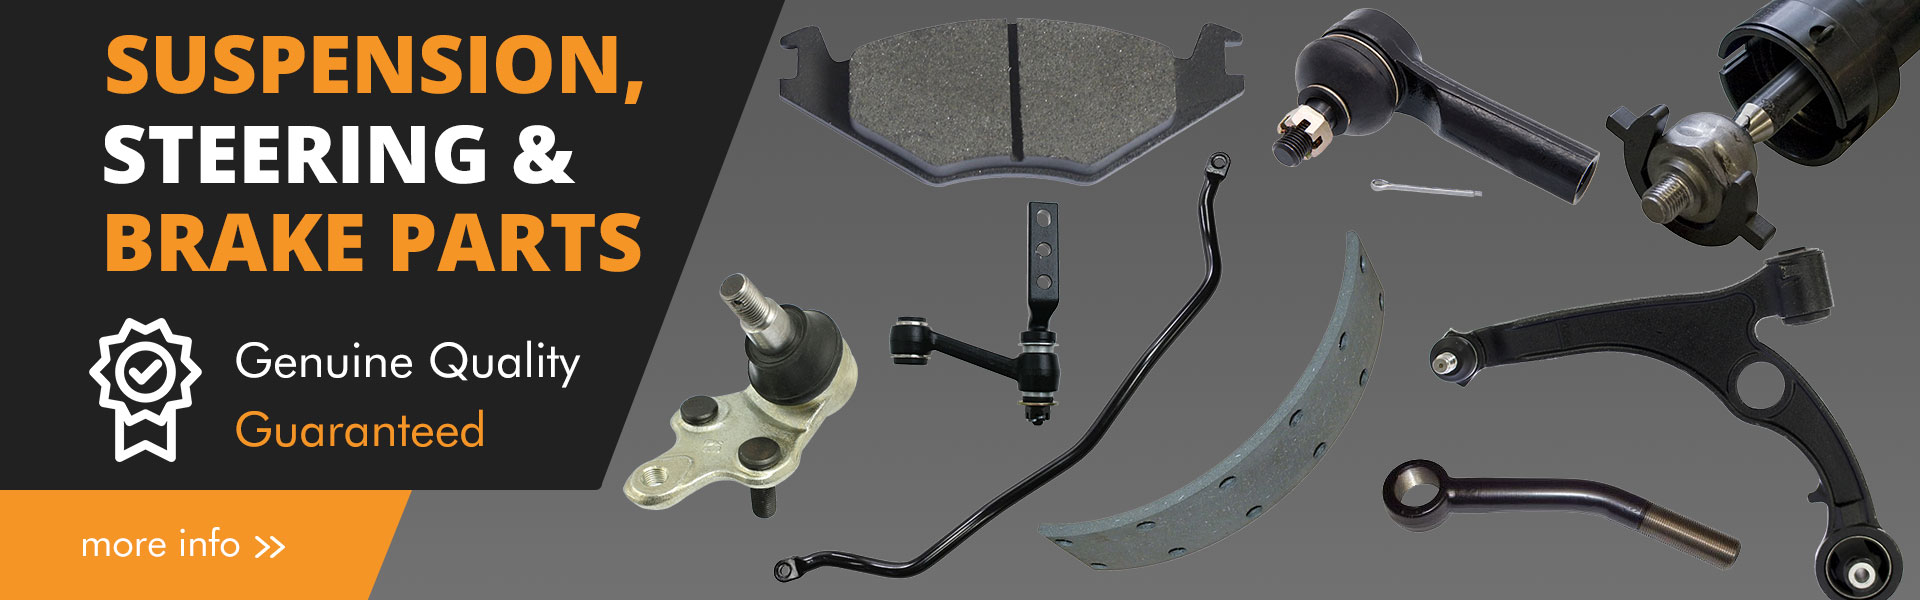 Suspension, Steering and Brake Parts